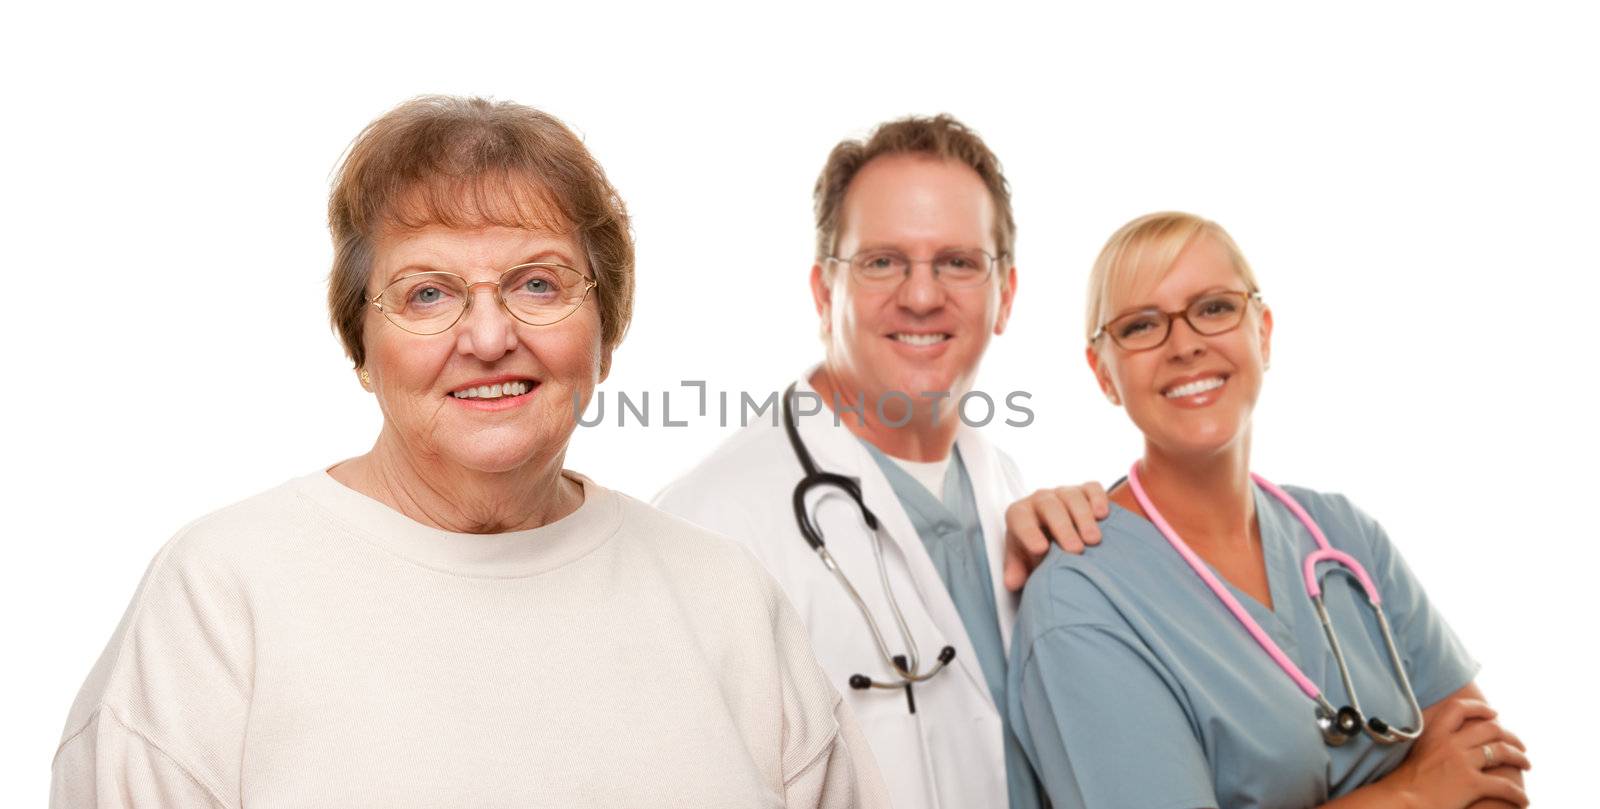 Smiling Senior Woman with Medical Doctor and Nurse Behind Isolated on a White Background.